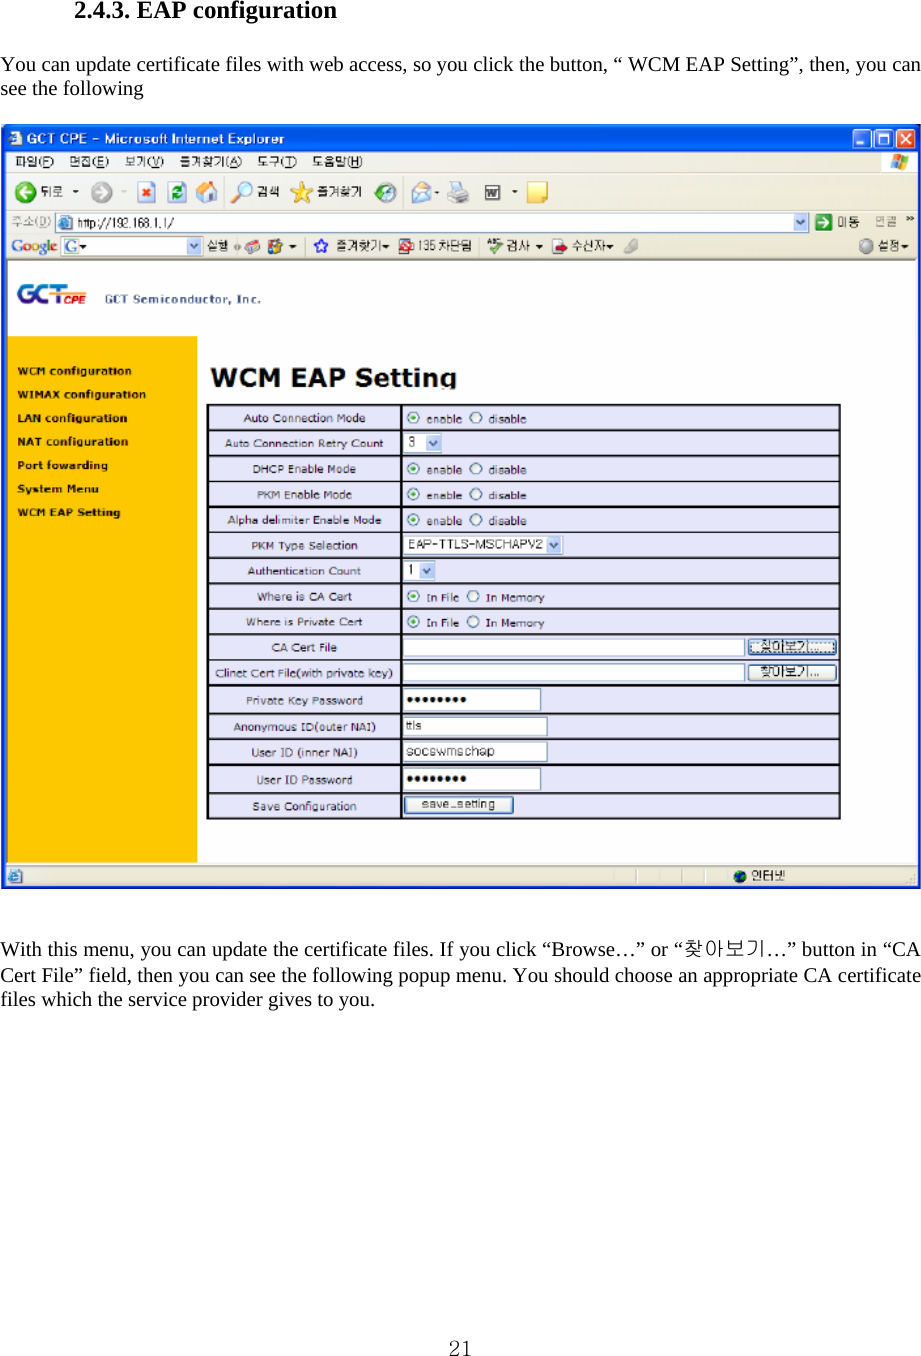  21 2.4.3. EAP configuration    You can update certificate files with web access, so you click the button, “ WCM EAP Setting”, then, you can see the following       With this menu, you can update the certificate files. If you click “Browse…” or “찾아보기…” button in “CA Cert File” field, then you can see the following popup menu. You should choose an appropriate CA certificate files which the service provider gives to you.   